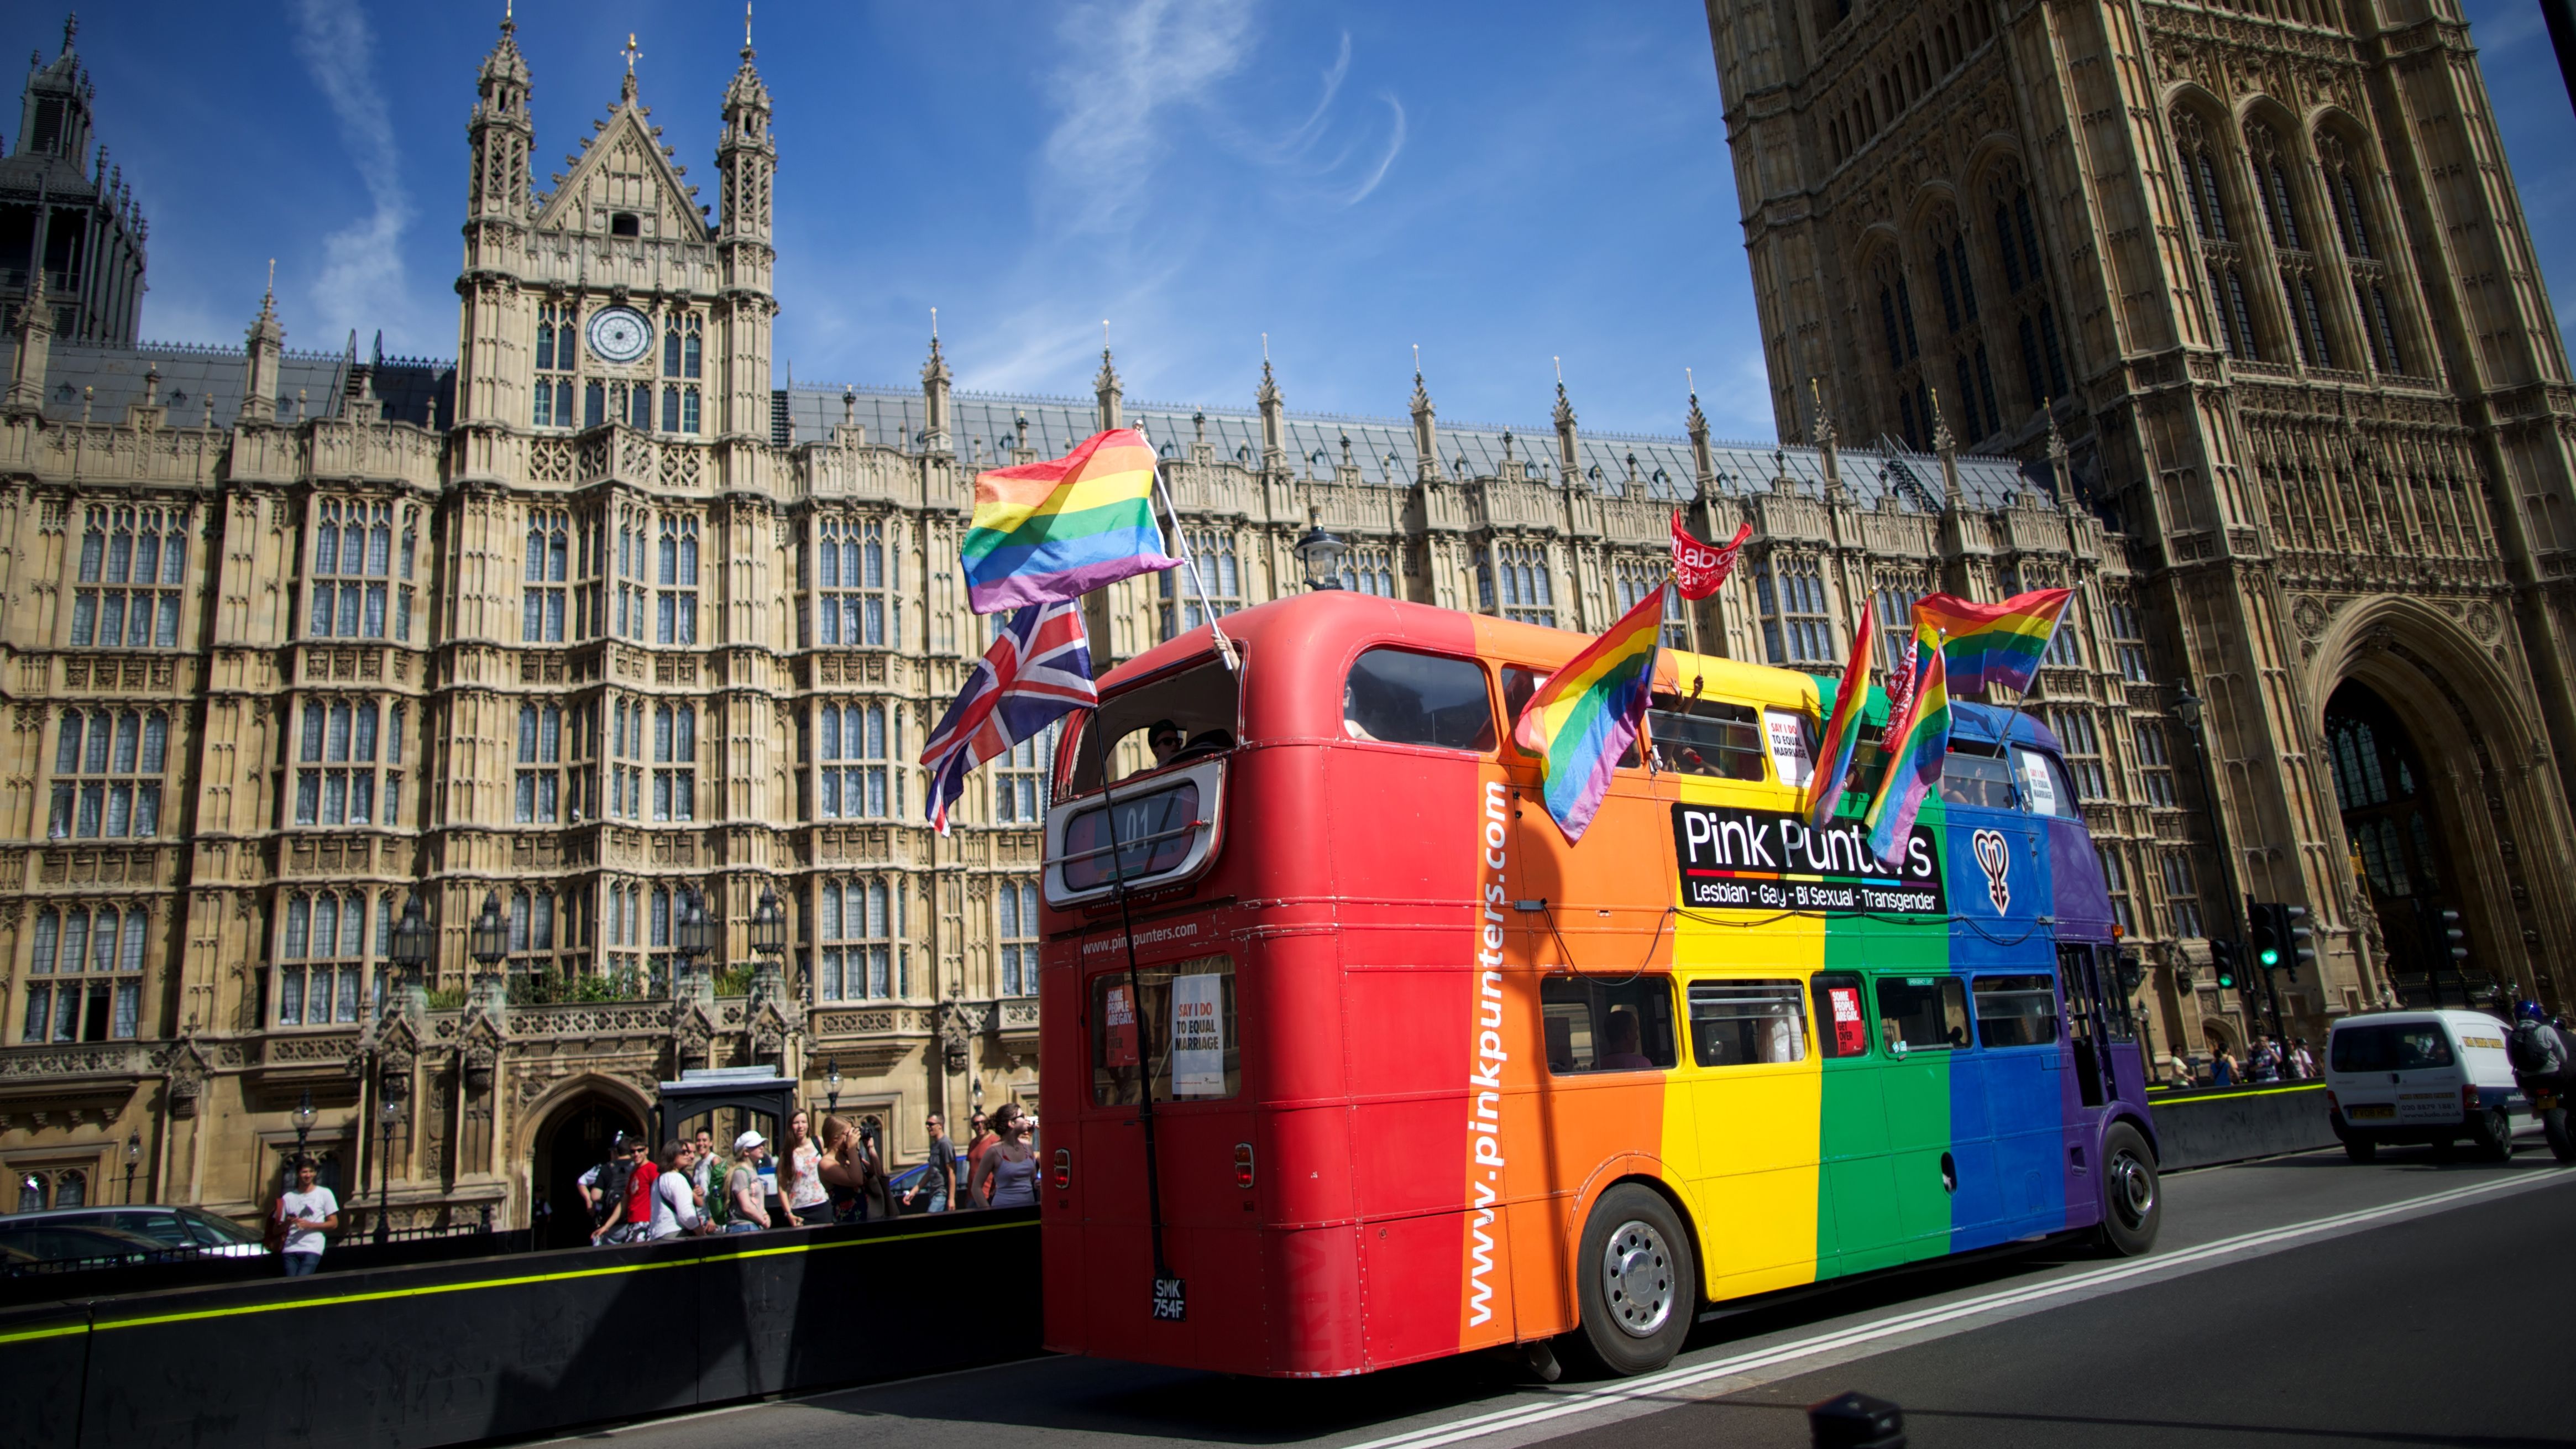 Same-sex marriage campaigners drive a bus past the Houses of Parliament on Monday.